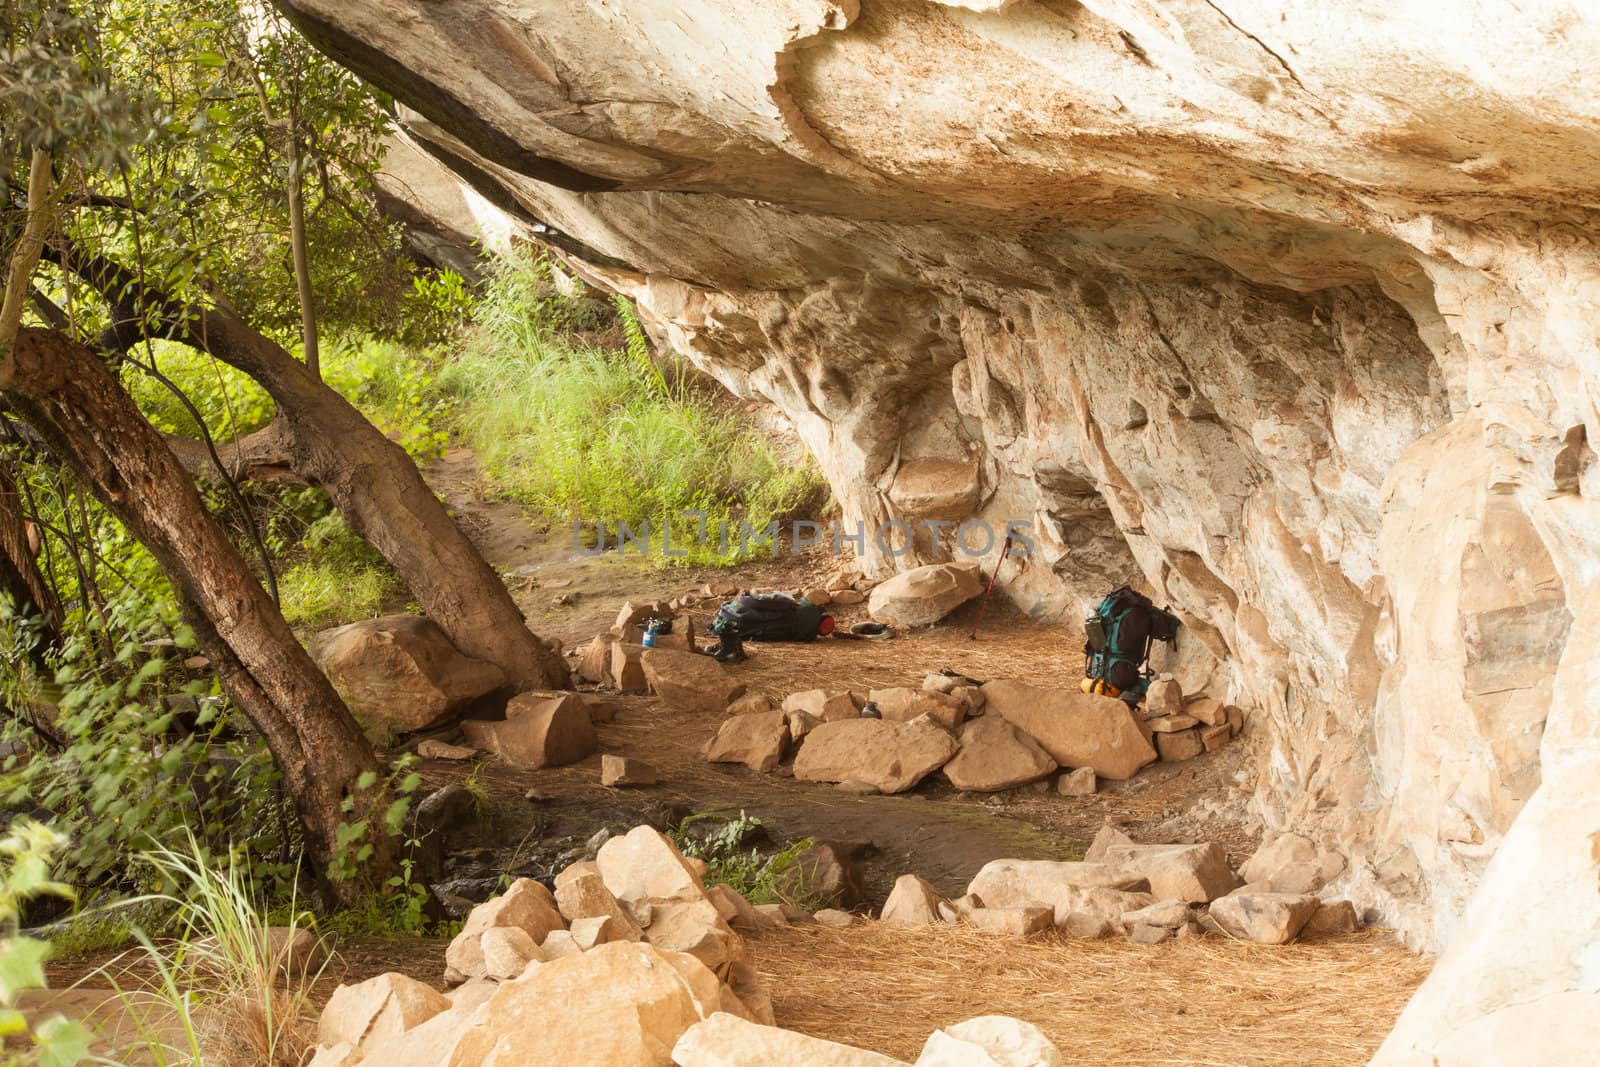 The Grindstone Cave, place to overnight near Injisuthi in the Drakensberg.